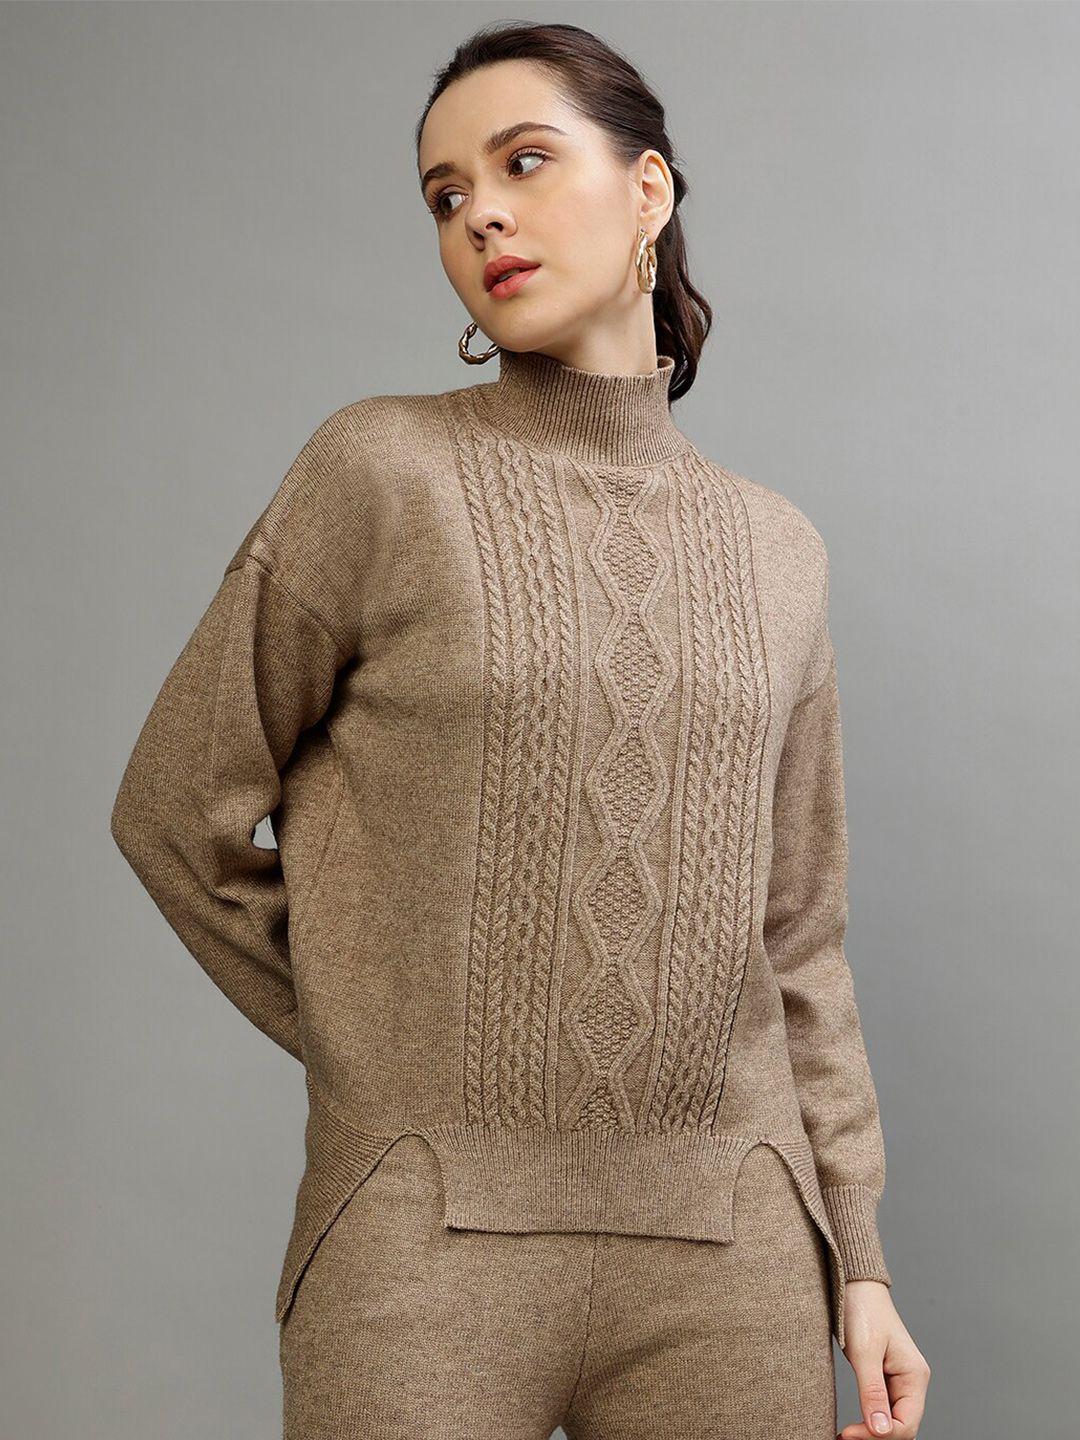 centrestage-cable-knit-self-designed-high-neck-pullover